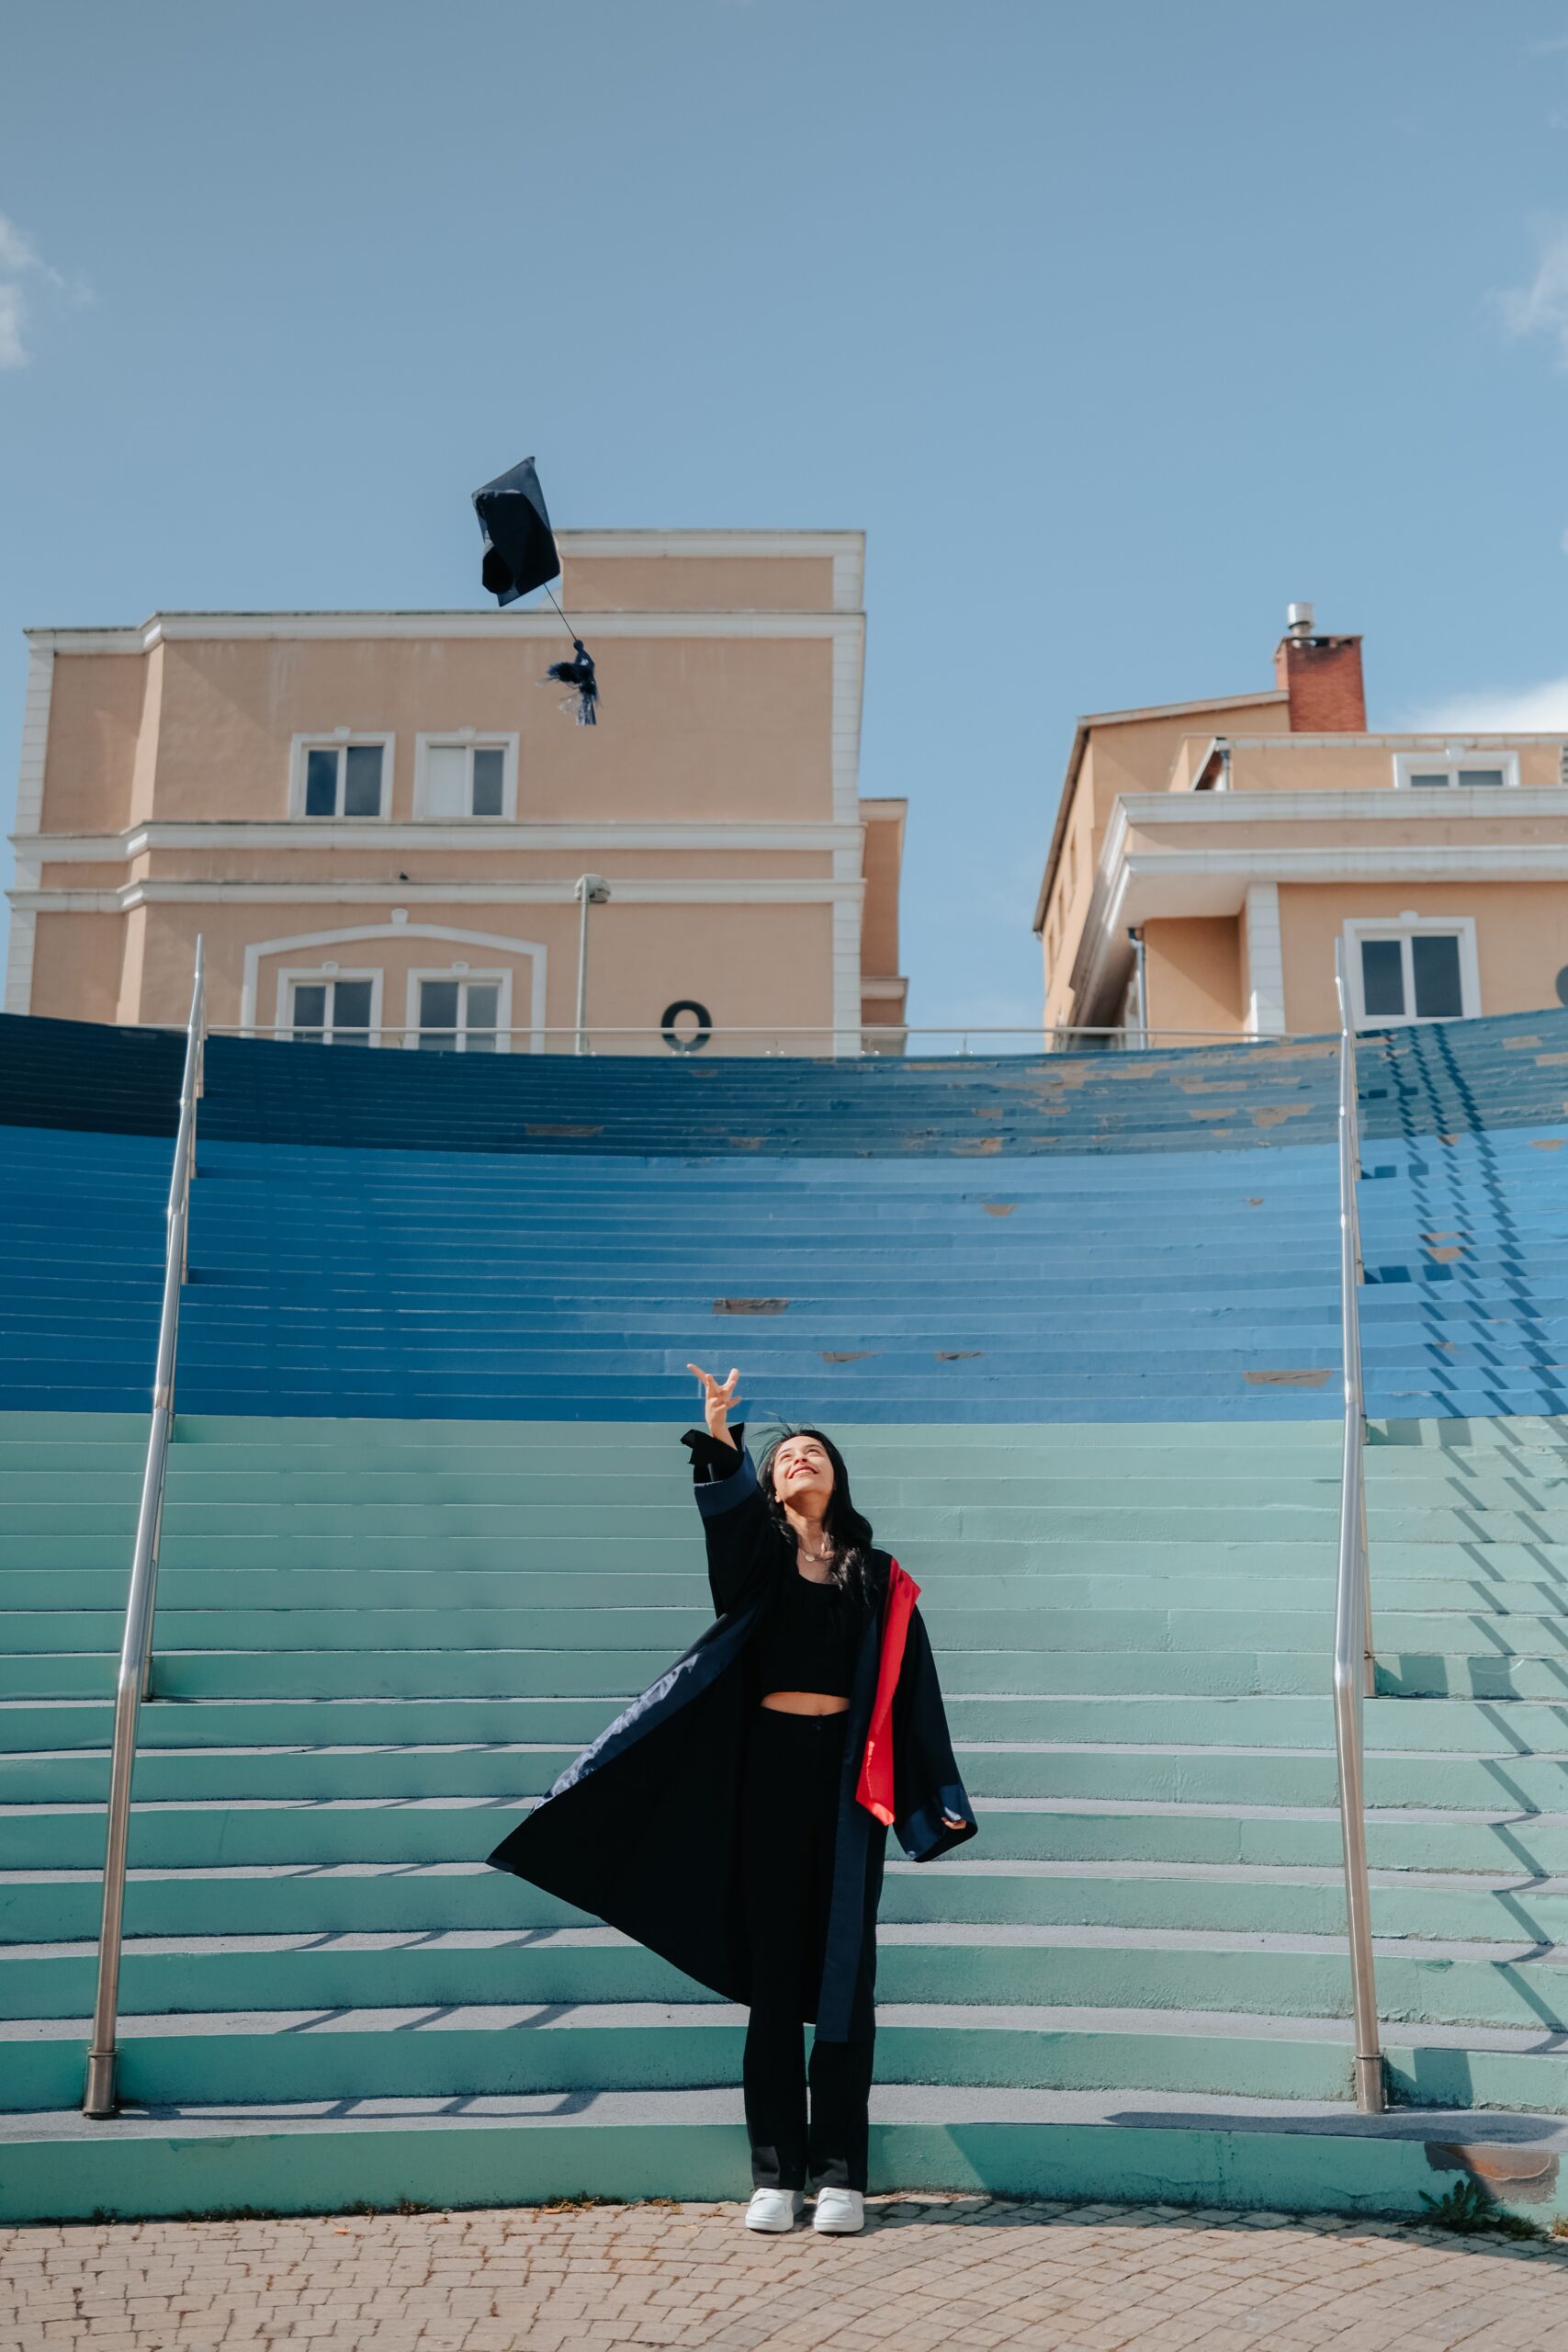 A young woman is standing by a set of blue stairs wearing a black graduation gown with a red sash. She is throwing her graduation cap in the air as she smiles.